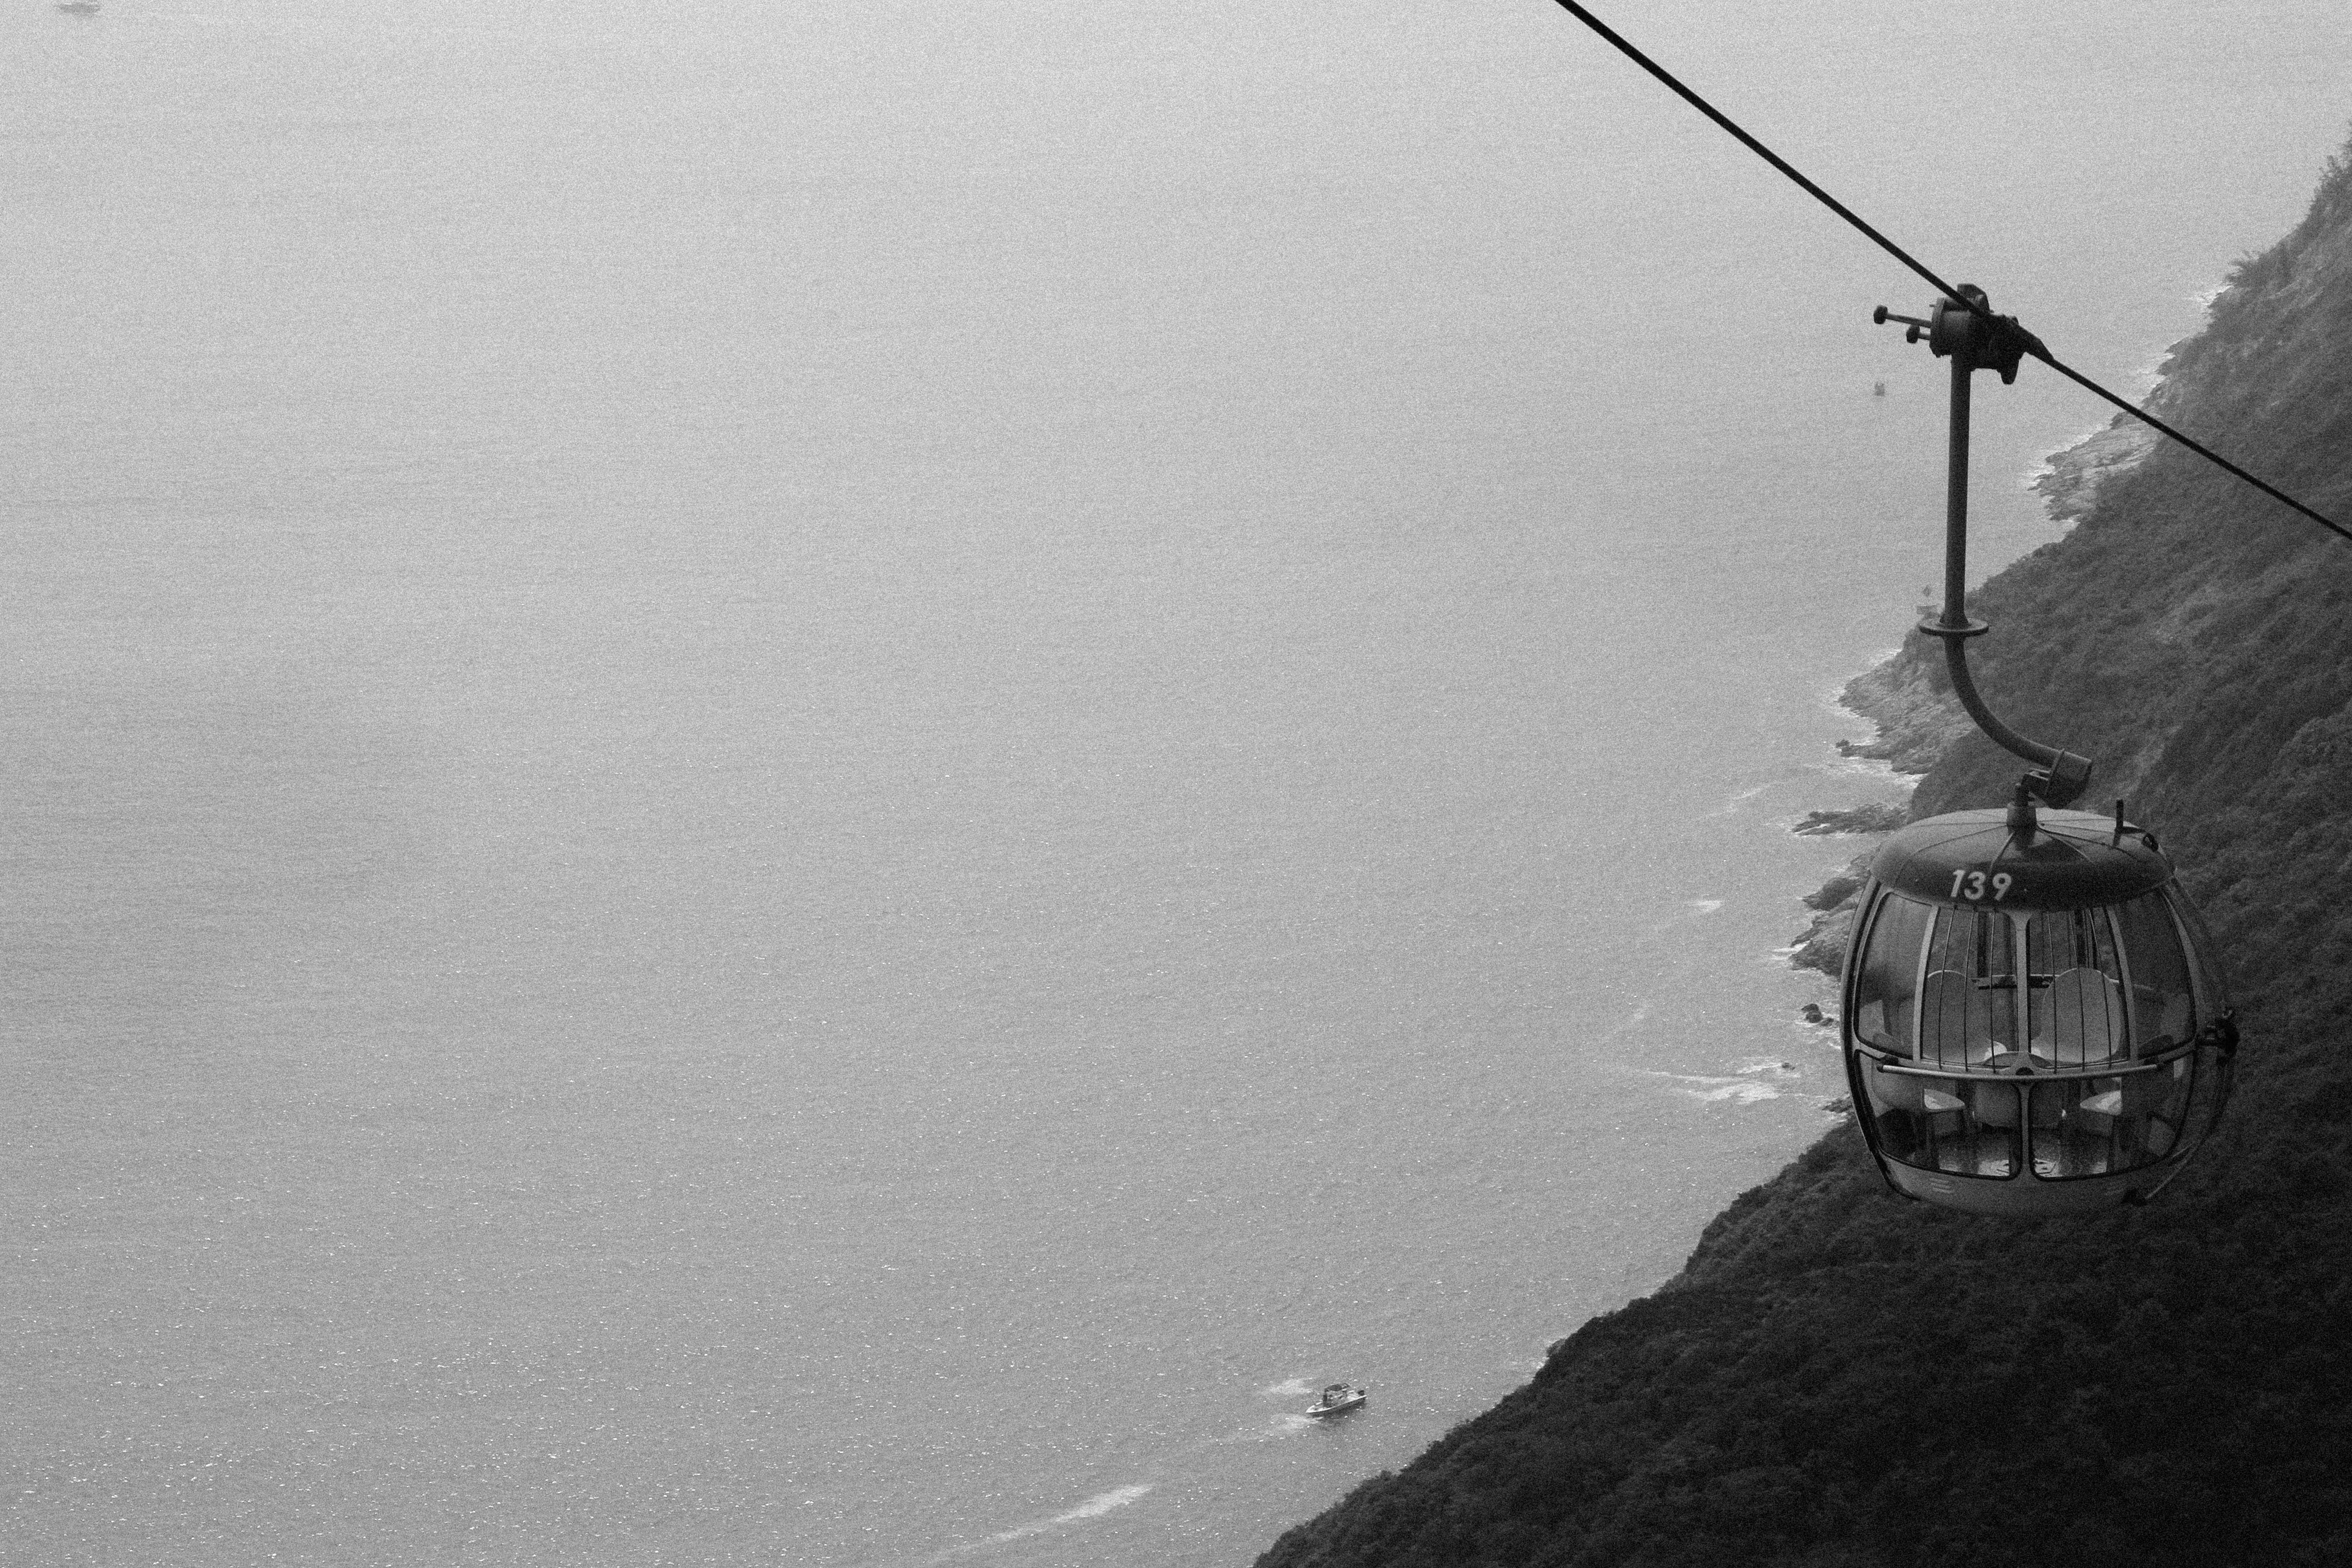 grayscale photography of cable car distance with sea, grayscale photo of cable car near body of water